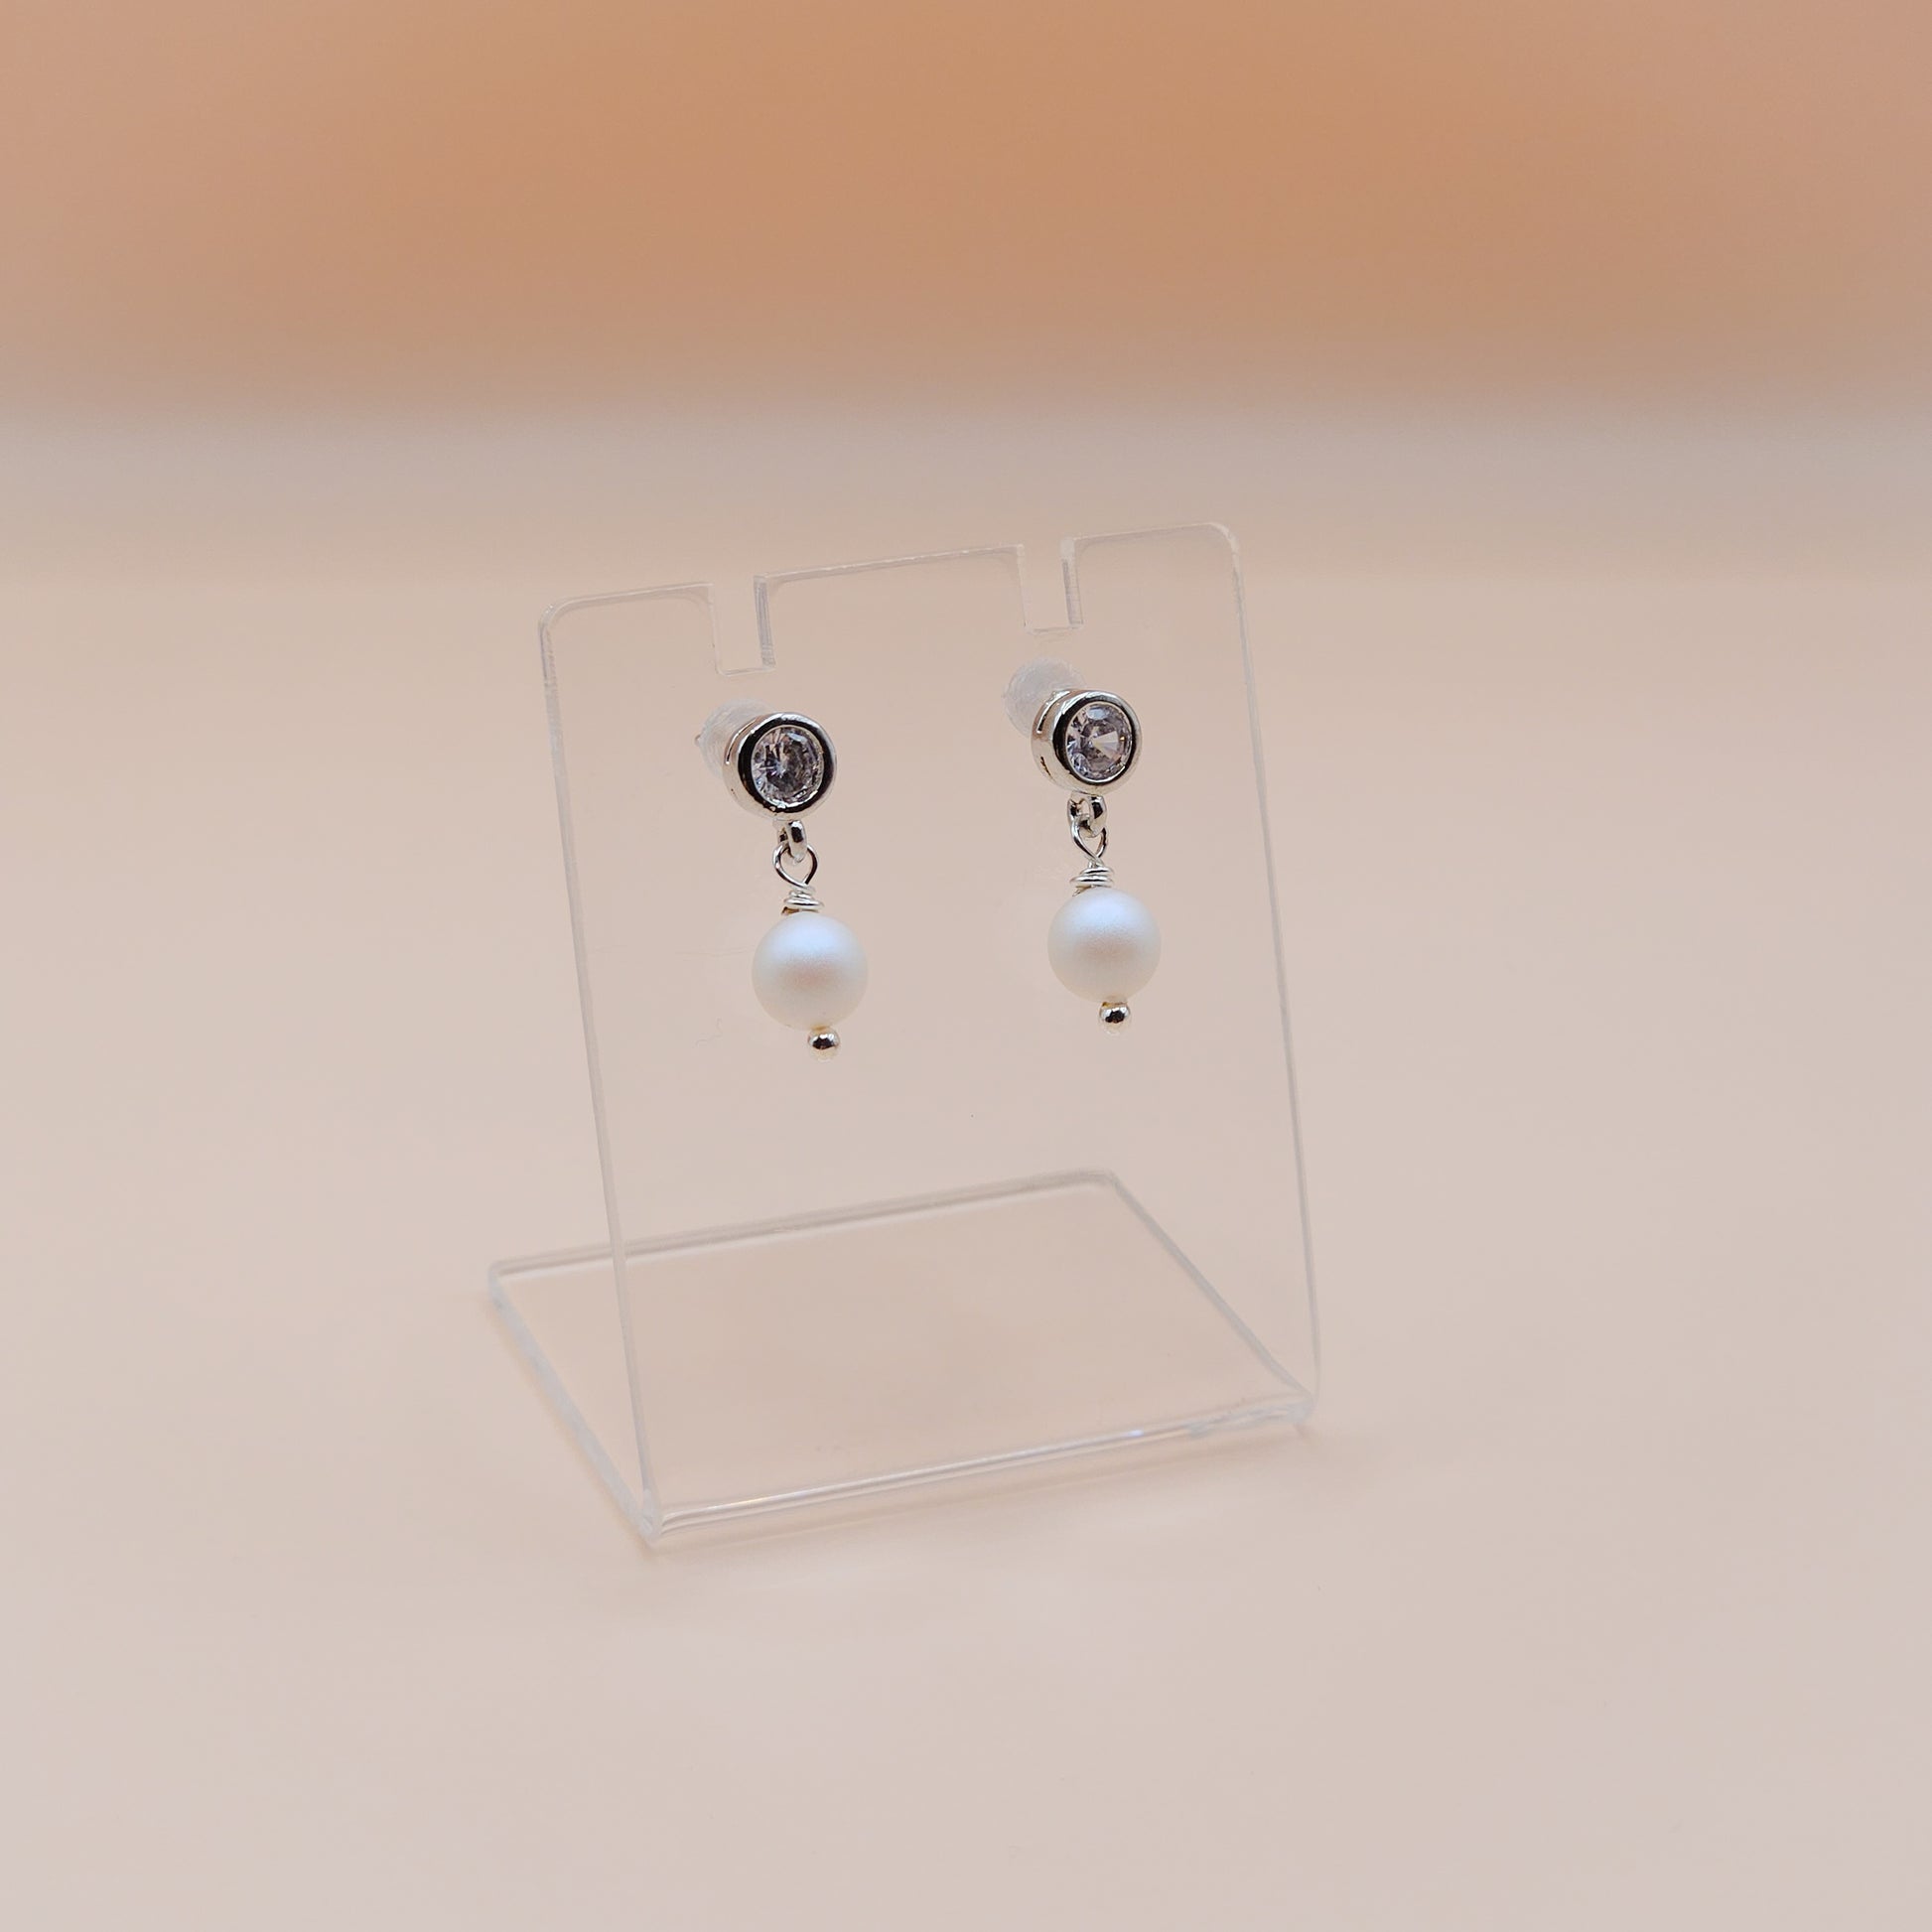 Acrylic Earring Display Stand | stud earring display set | shop displays, craft market stall  jewellery display stands